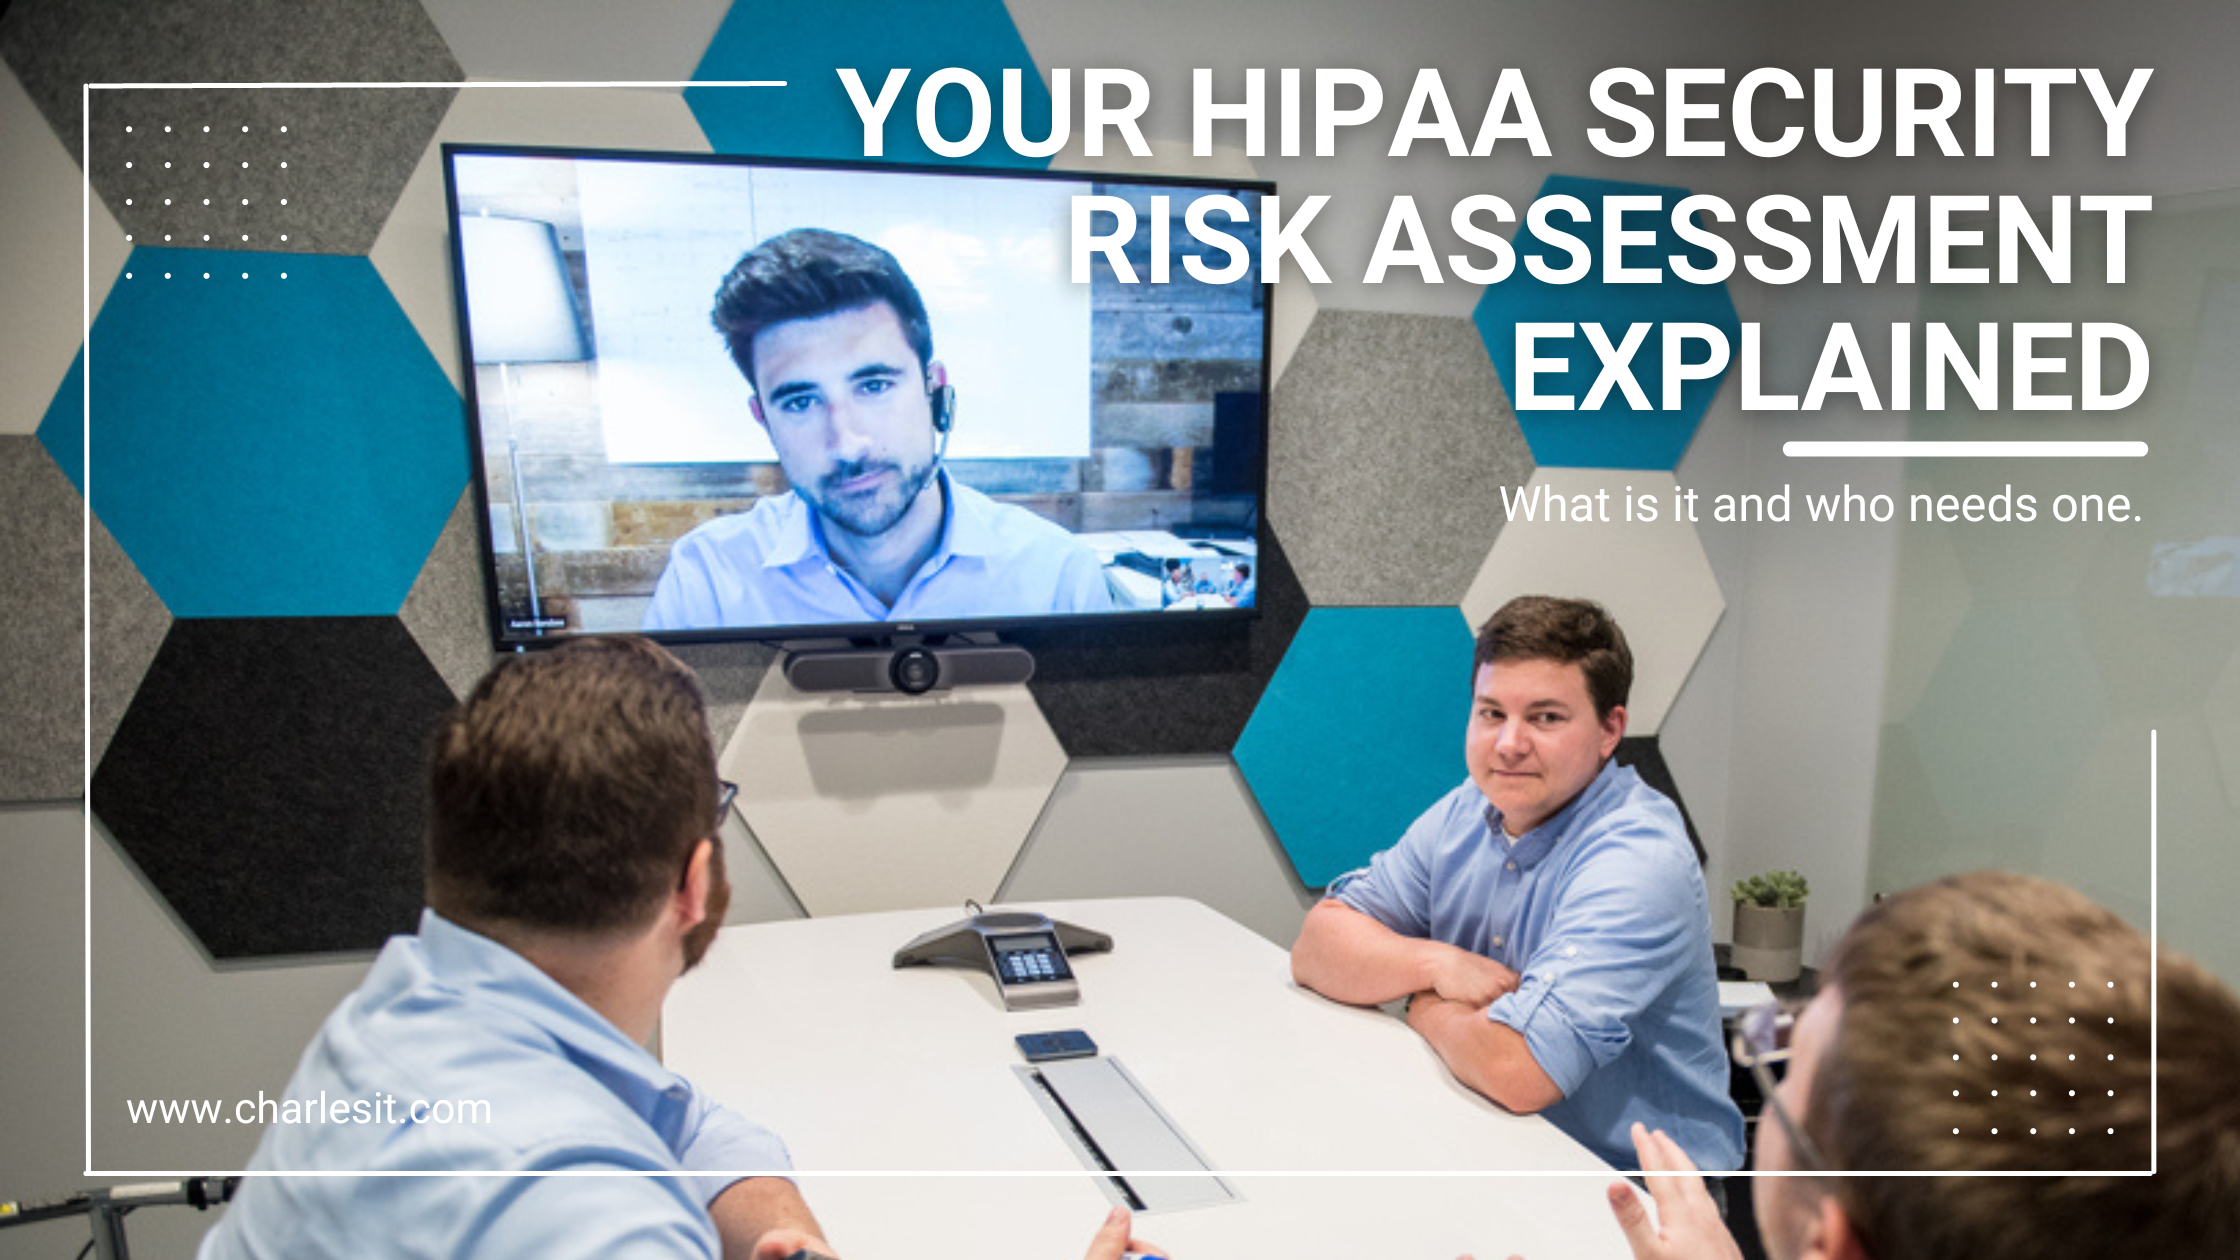 What is a HIPAA security risk assessment, and who needs one?